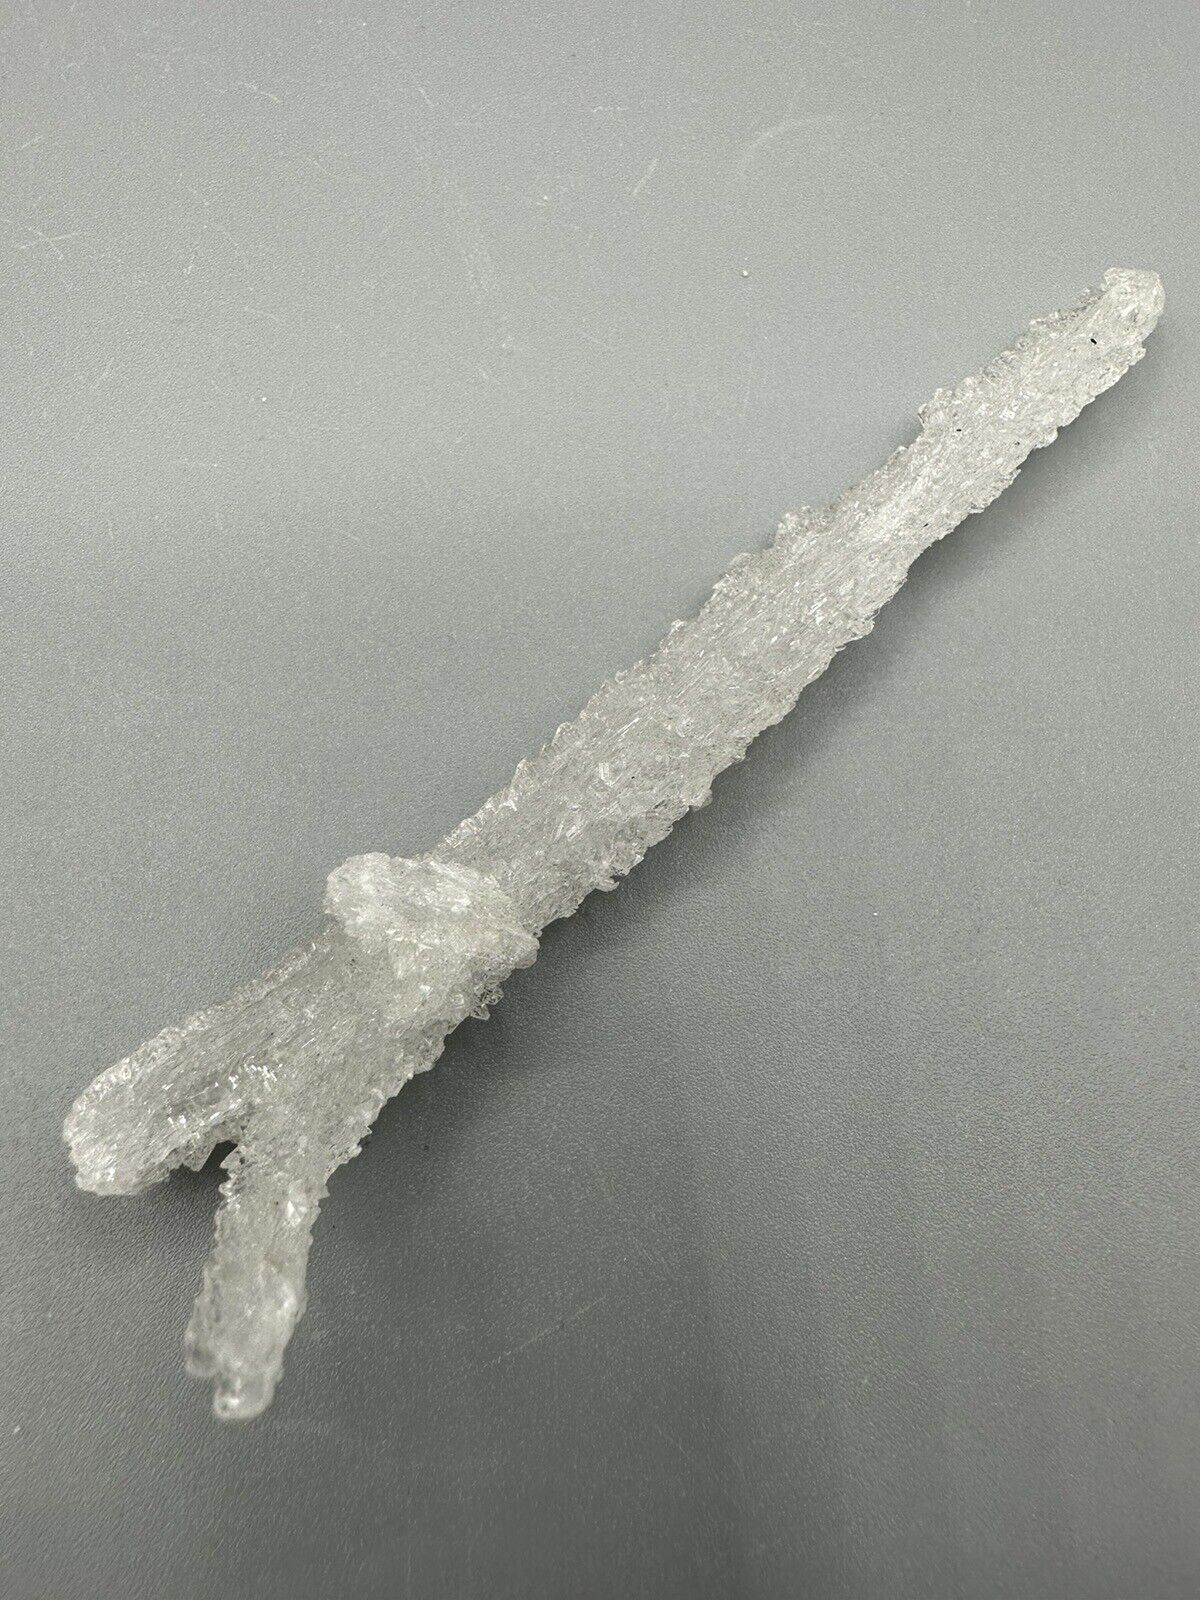 Gypsum “Ram’s Horn” Mineral Specimen From Chihuahua, Mexico